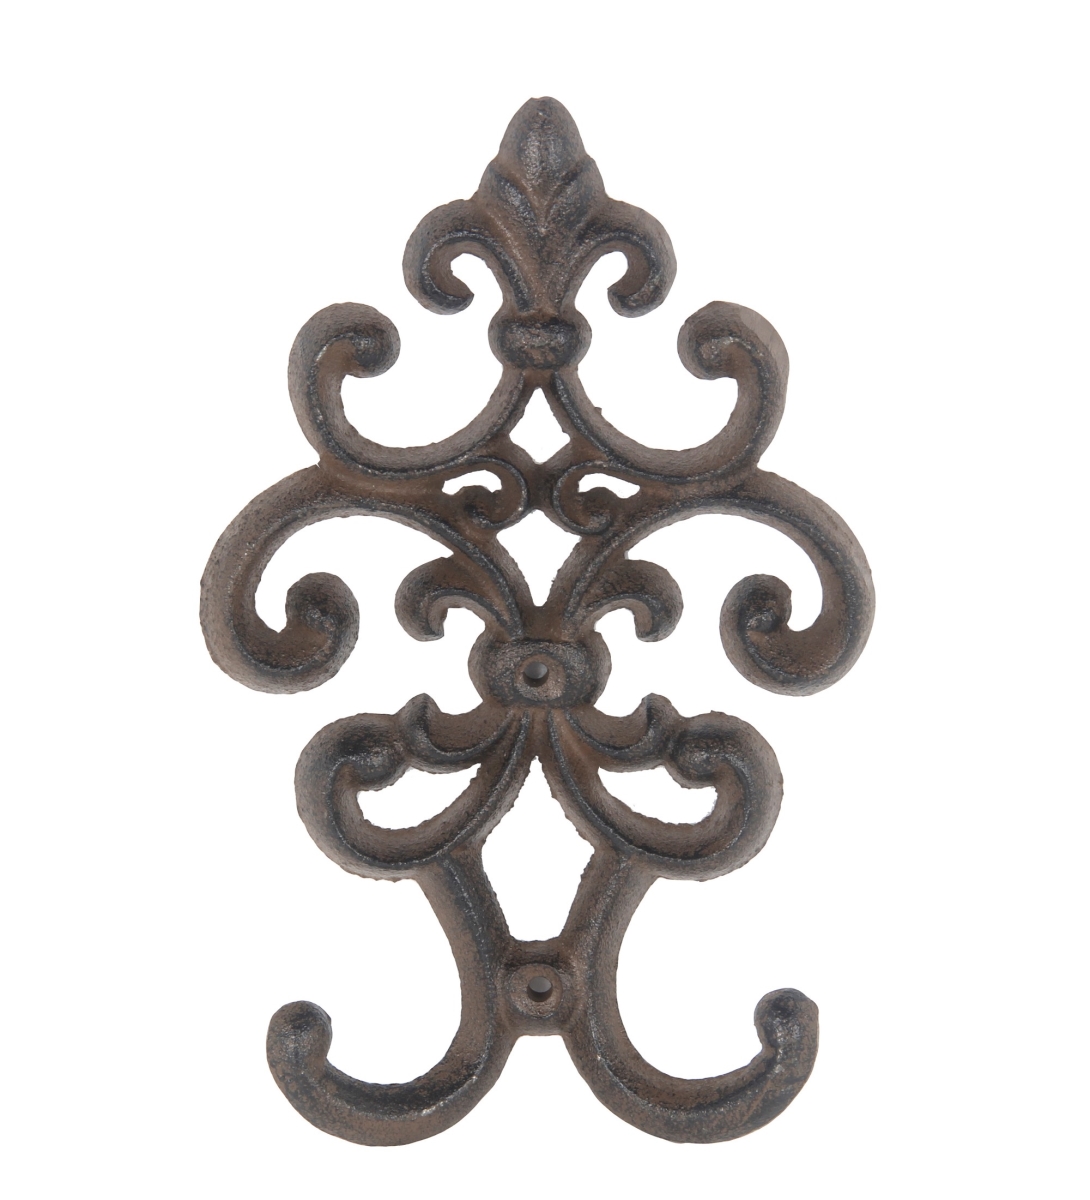 UPC 805572198595 product image for 19859 Decorative Wall Hook, Rust Brown - 5 x 8 x 1 in. | upcitemdb.com